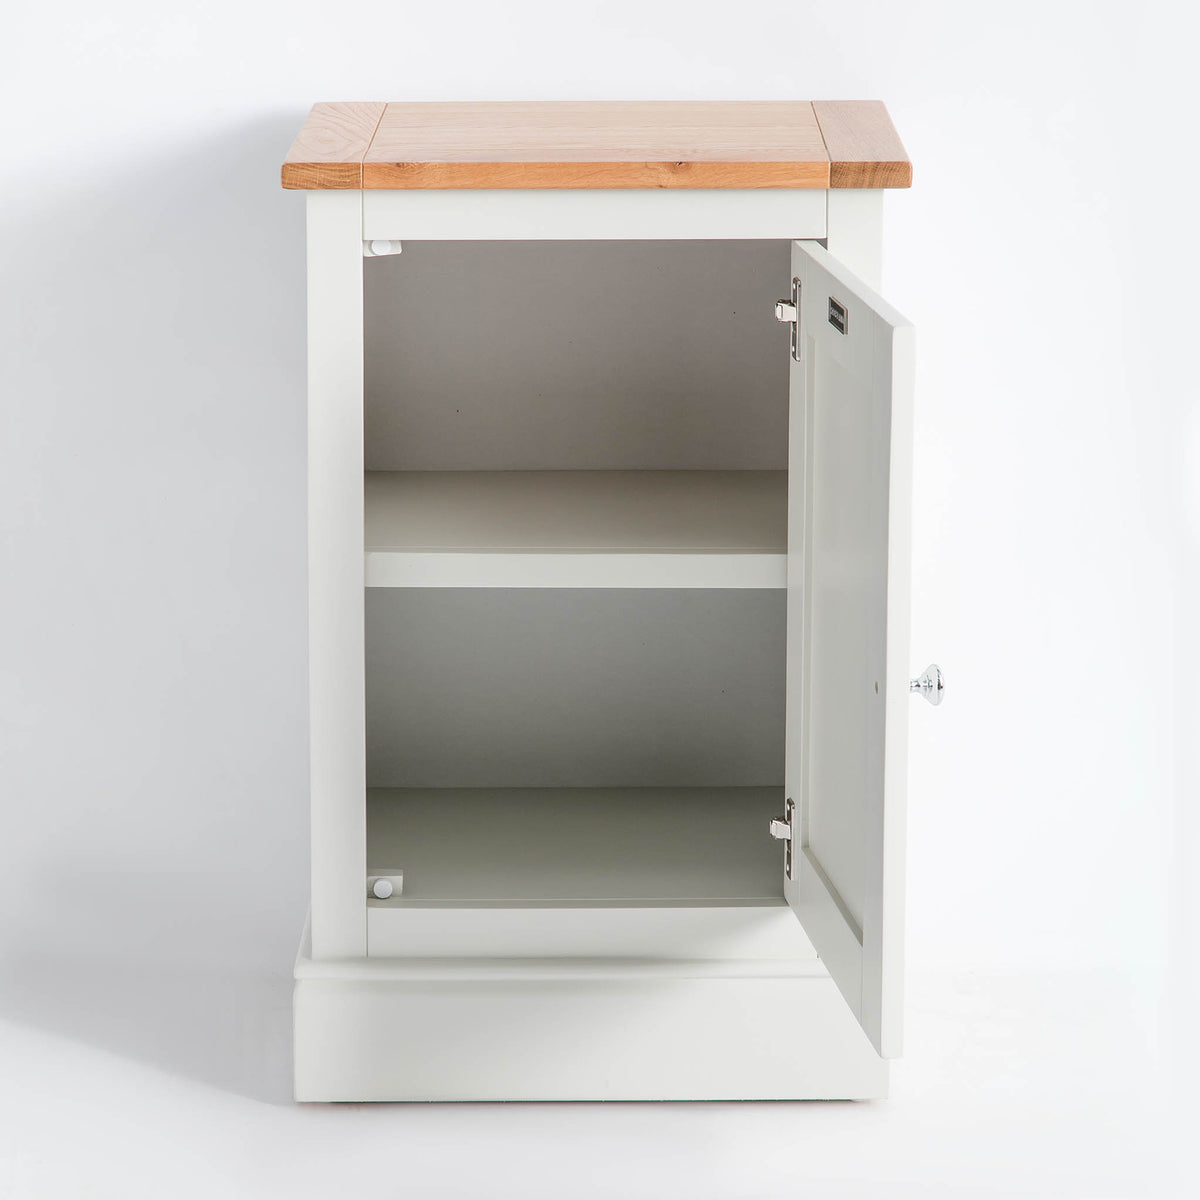 Internal view of the Chichester Ivory Cream Mini Cupboard